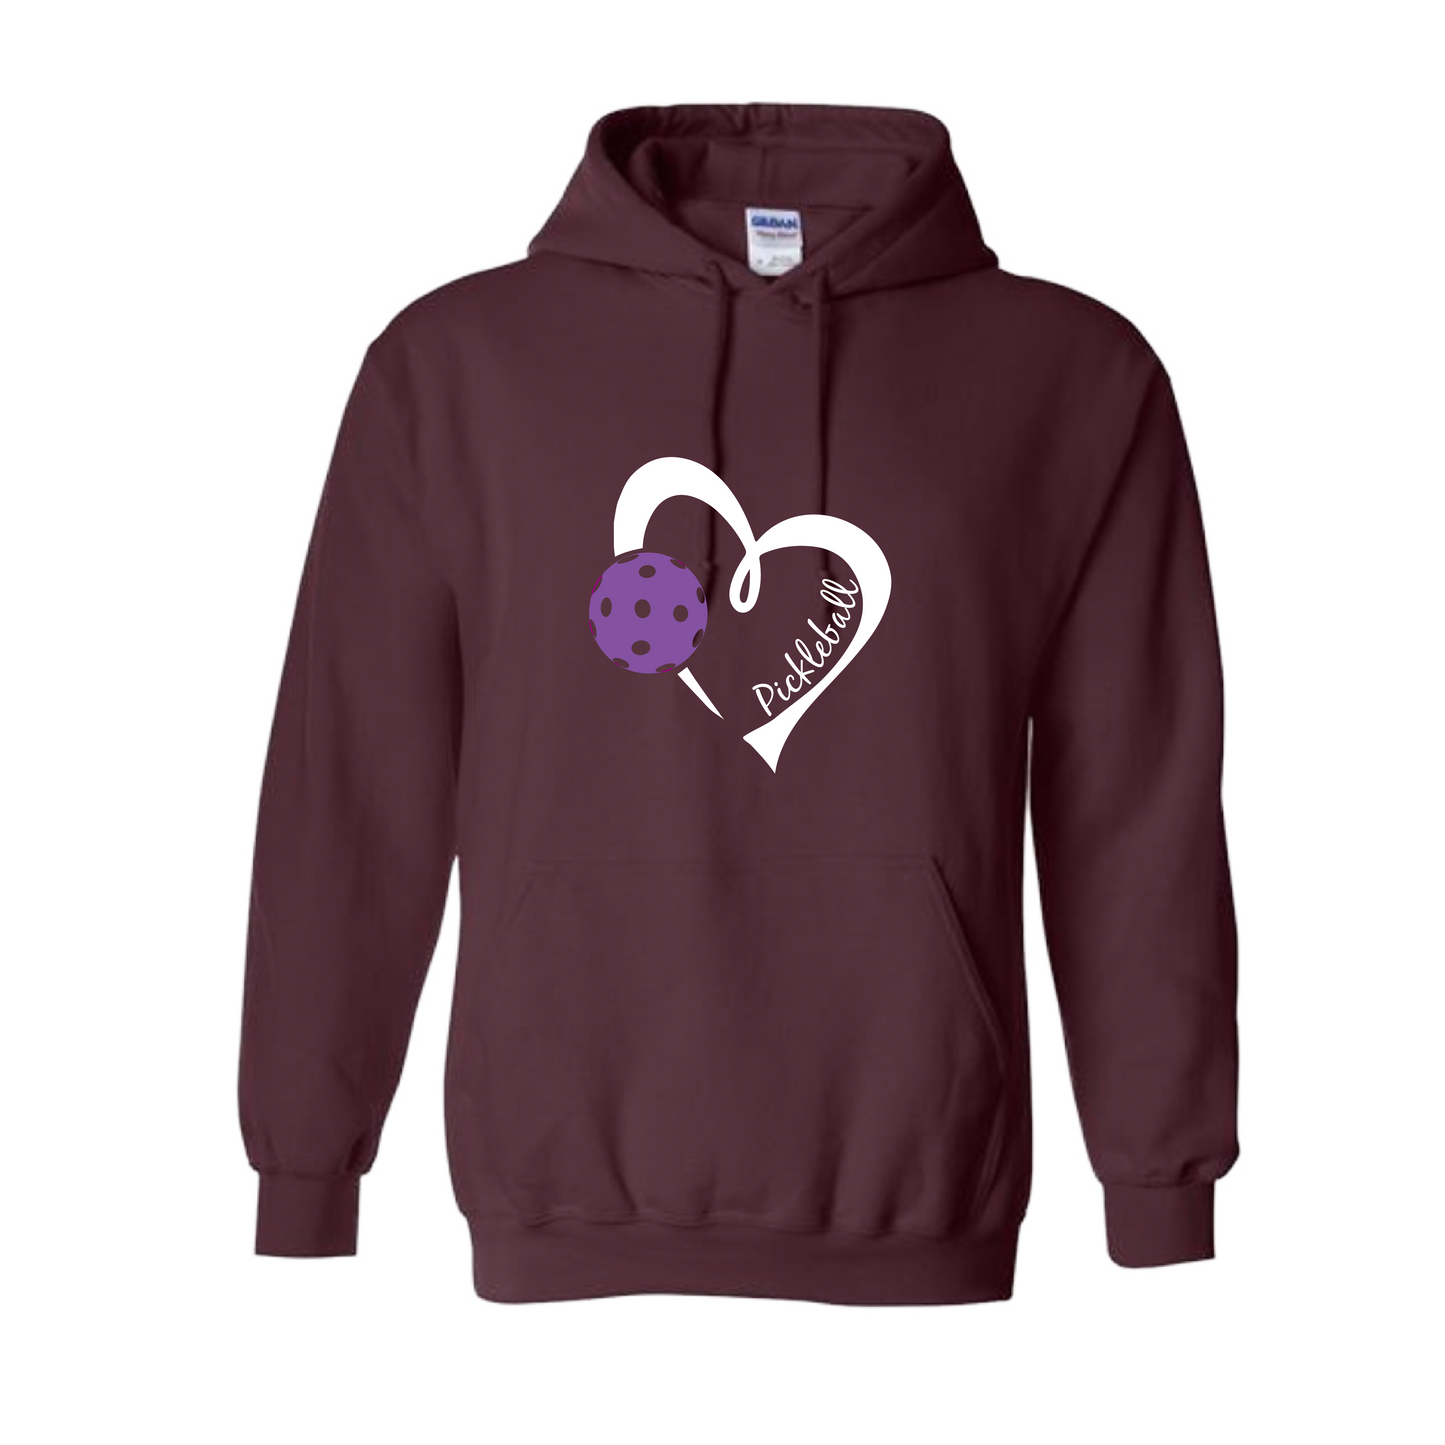 This unisex hoodie is designed to keep the wearer warm and comfortable on the Pickleball court. It features a double-lined hood, moisture-wicking material, and a front pouch pocket. With its unique design, it provides both fashion and function.